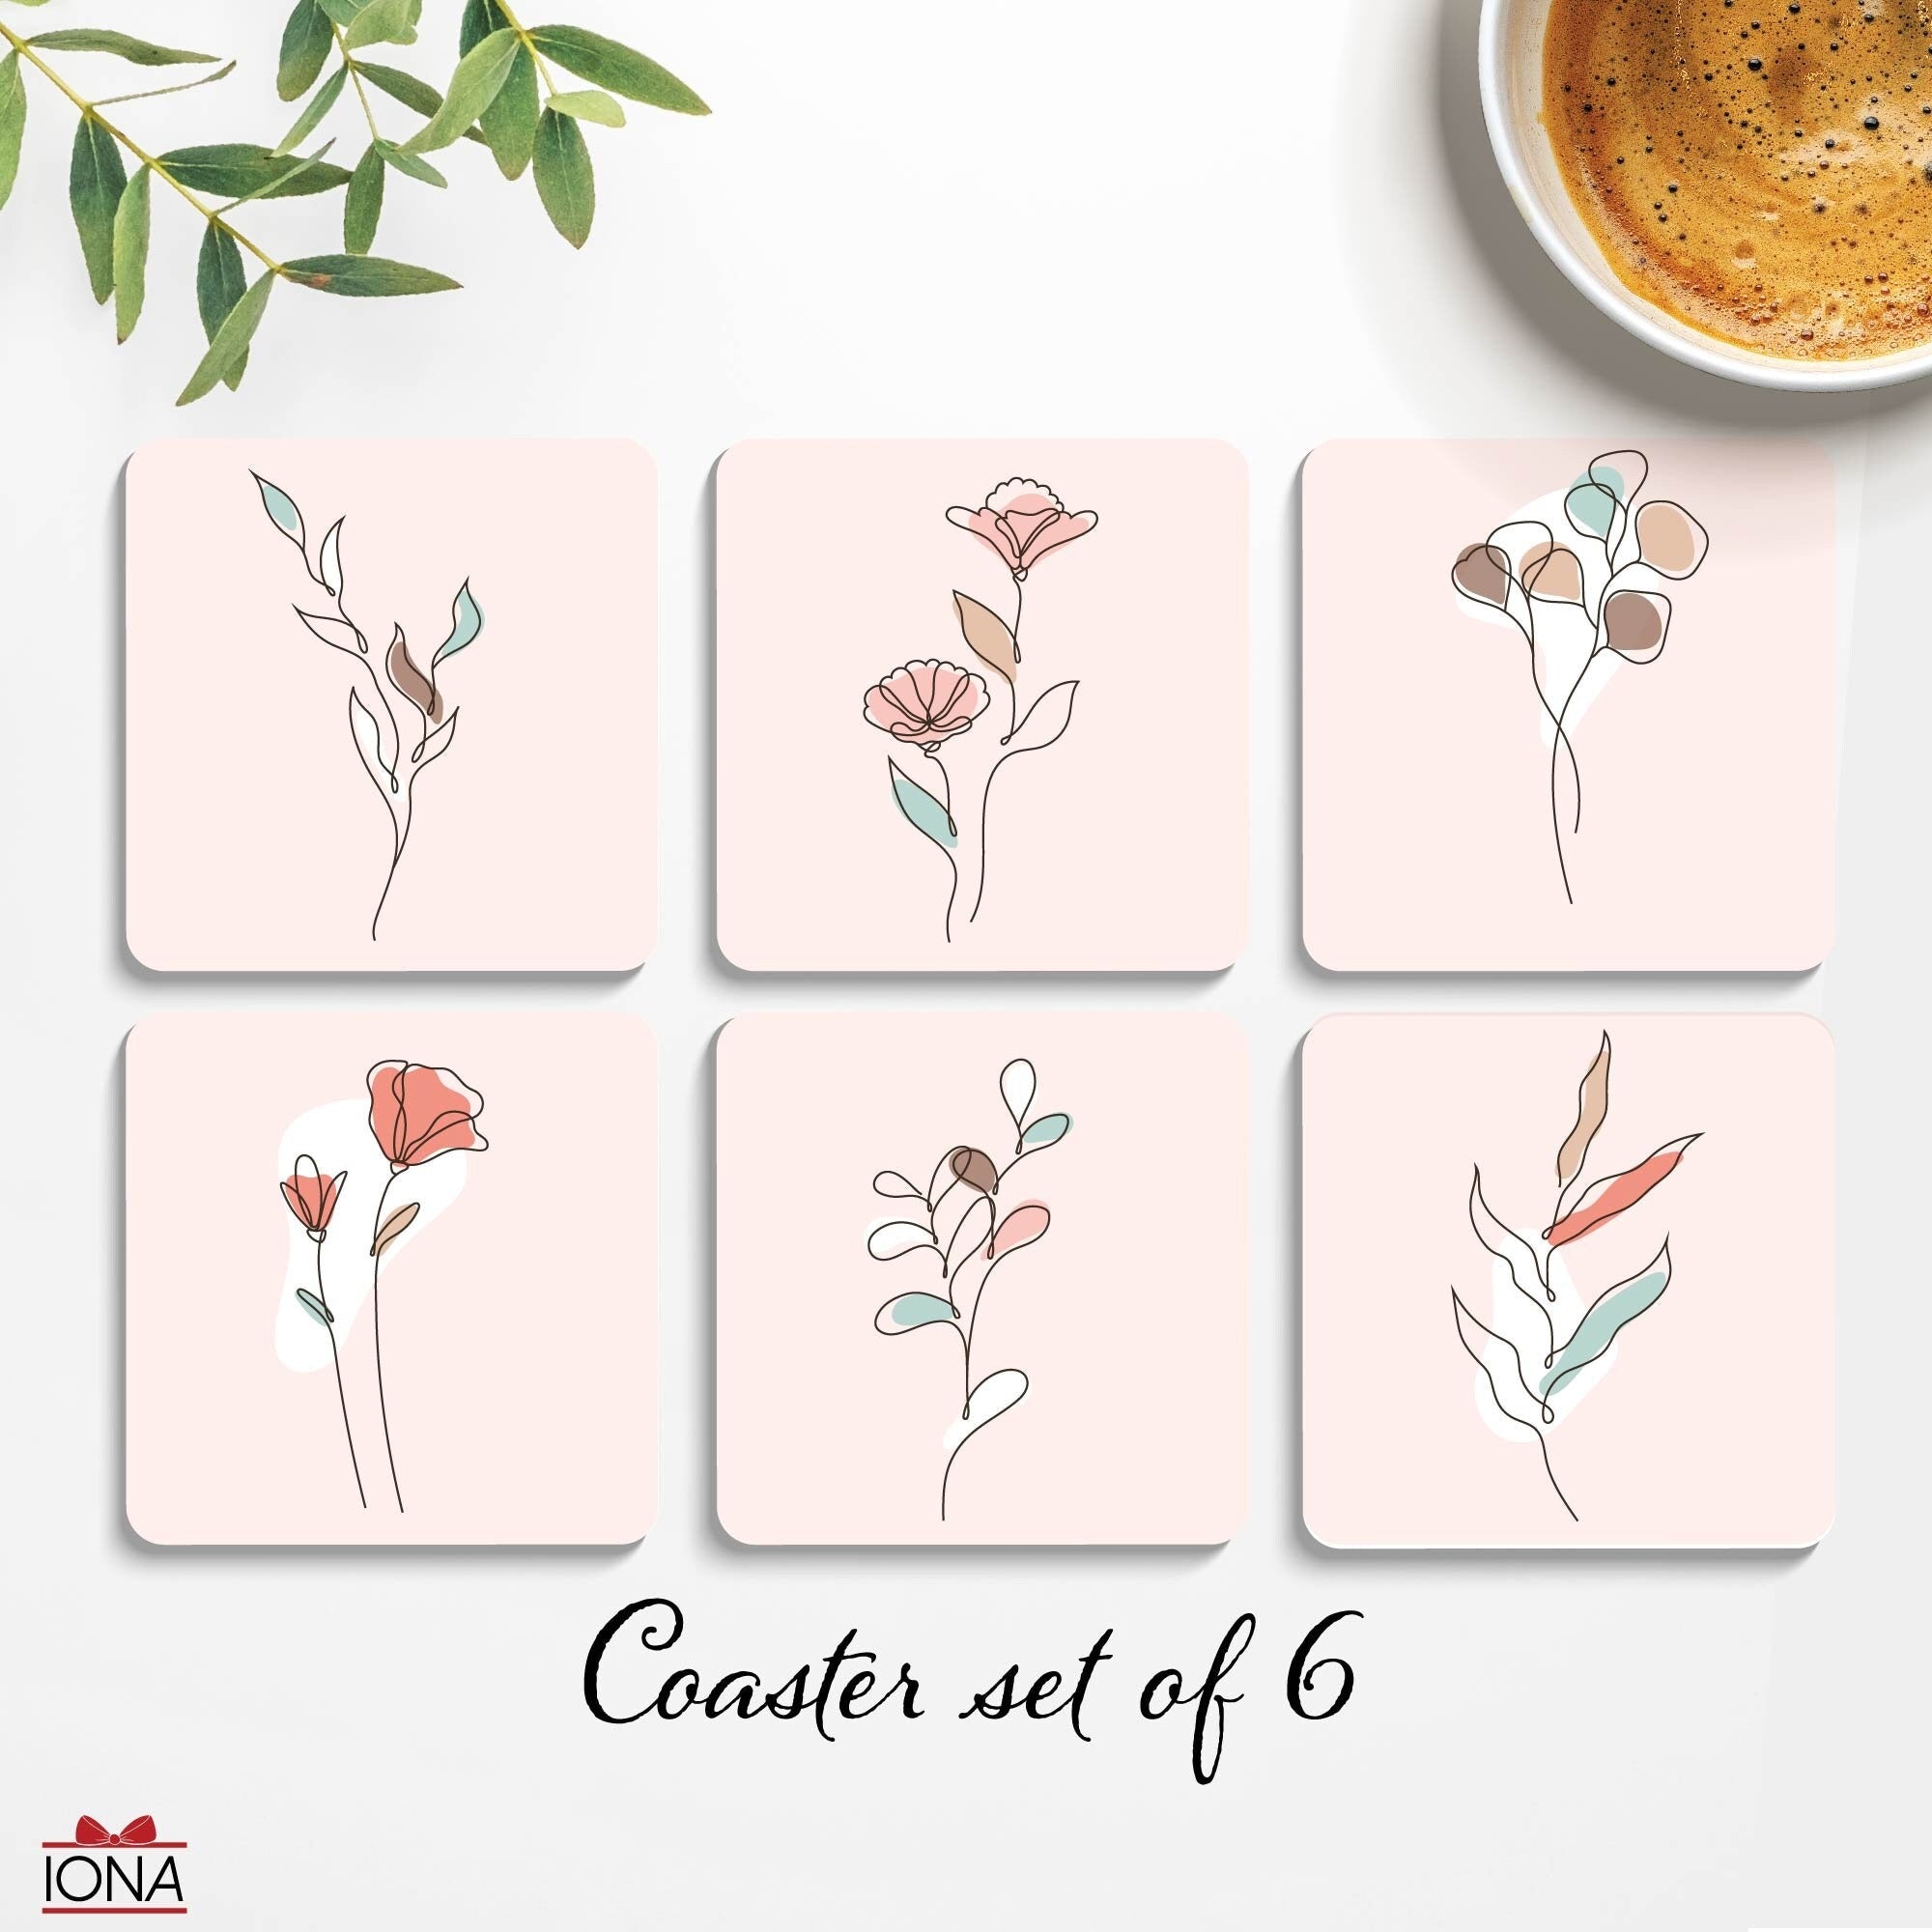 Coasters Set of 6, Drink Coasters Set, Abstract Flower Art Coasters, Housewarming Gift, Cups and Glasses-Protection Any Table and Countertop